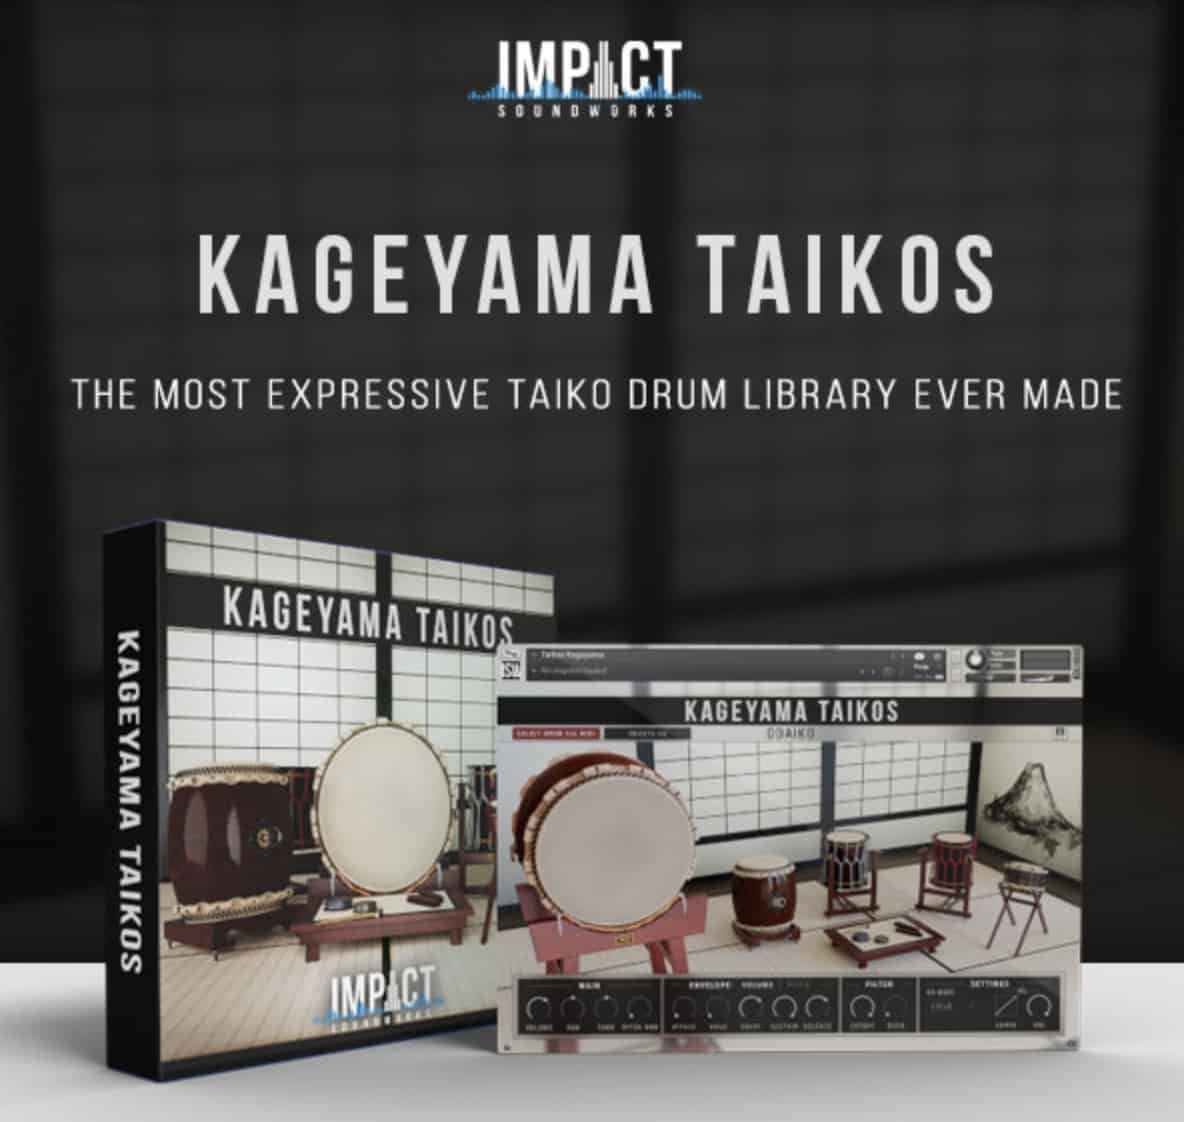 Kageyama Taikos A Sound Library That Will Change The Way You Hear Percussion